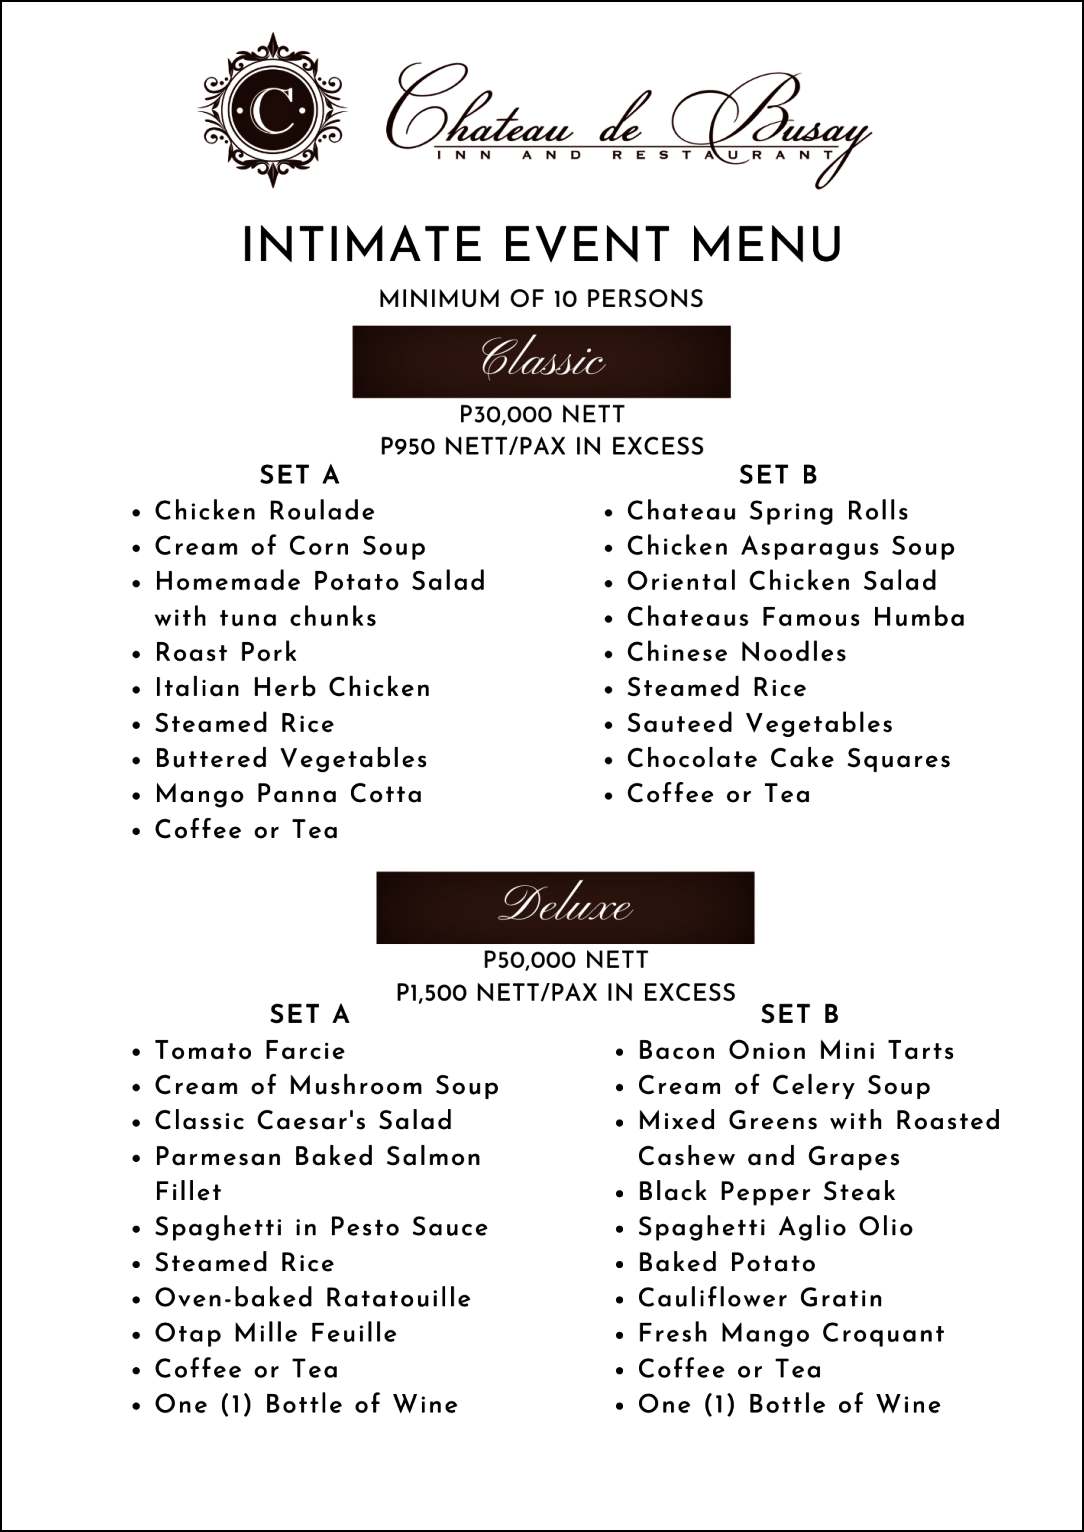 INTIMATE EVENT PACKAGE 